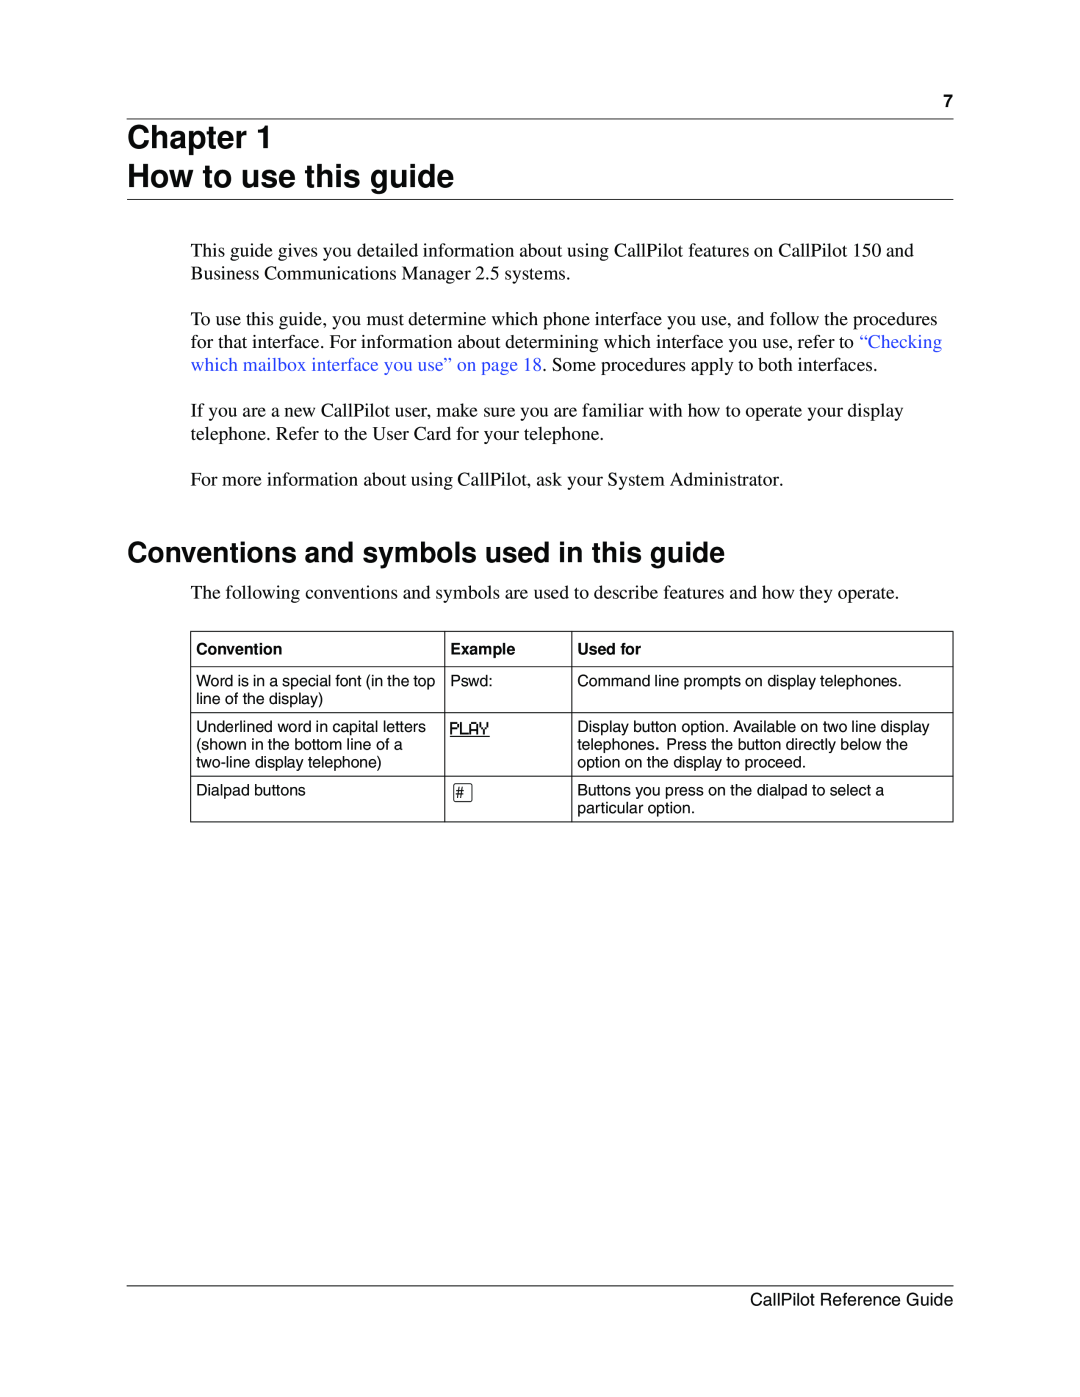 Nortel Networks CallPilot manual Chapter How to use this guide, Conventions and symbols used in this guide, Play 